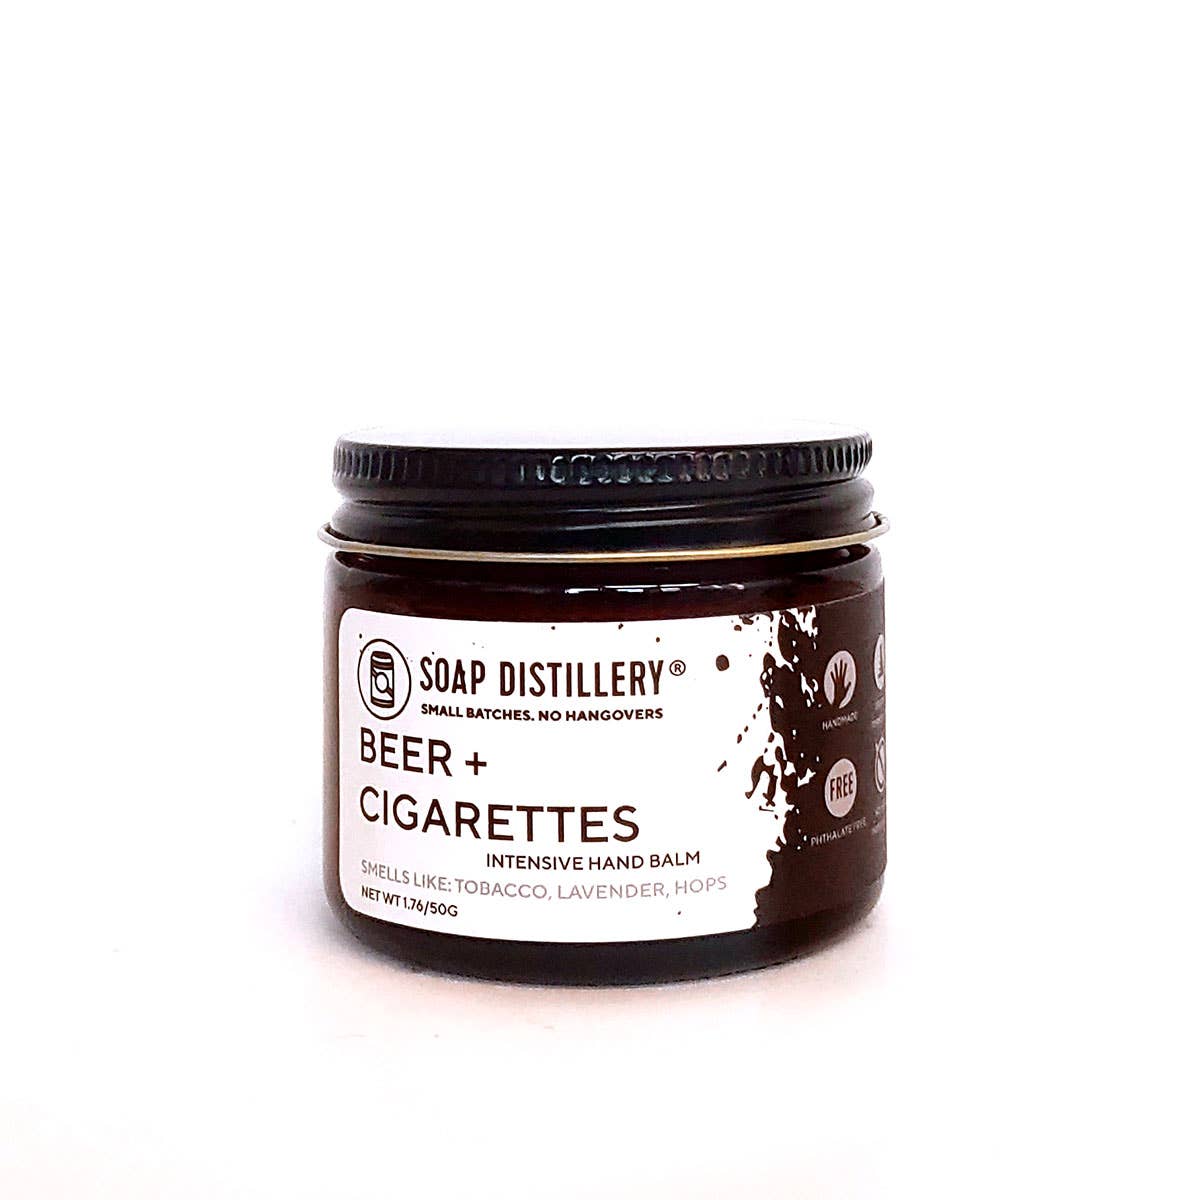 Beer + Cigarettes Intensive Hand Balm